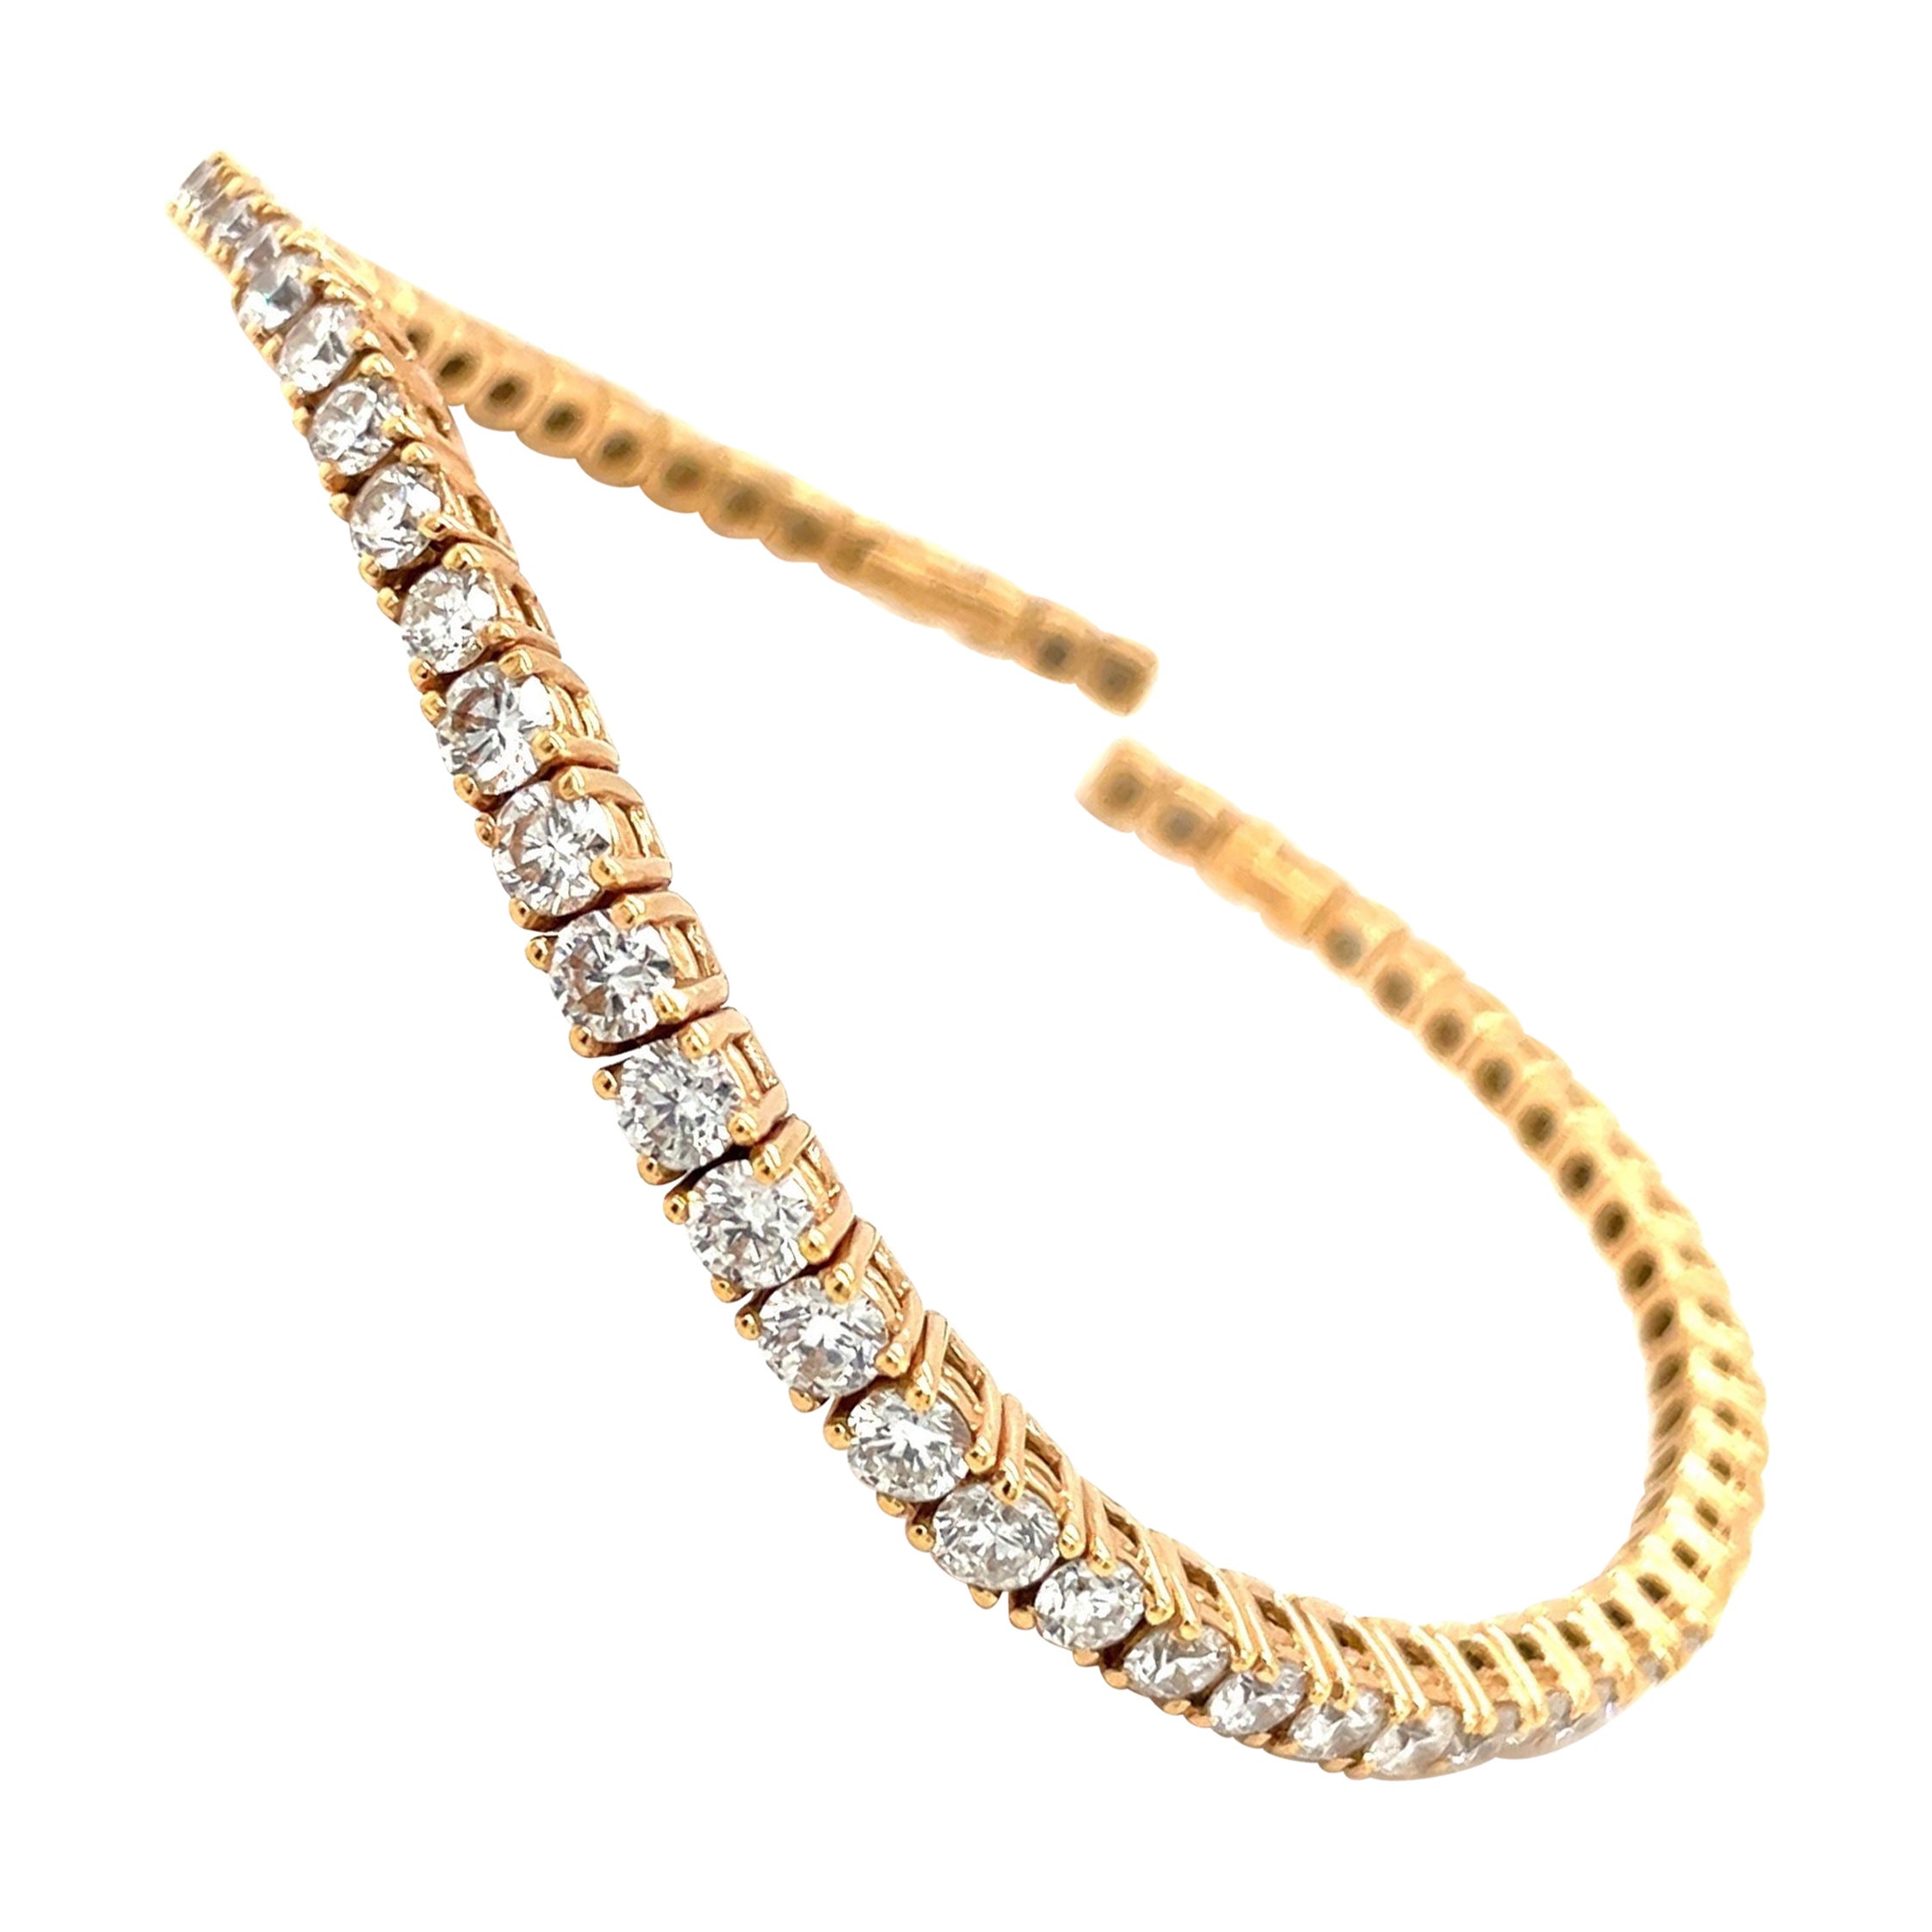 G. Verdi for Cellini NYC 18KT RG 2.38CT Diamond Curved Spring Wire Bracelet For Sale